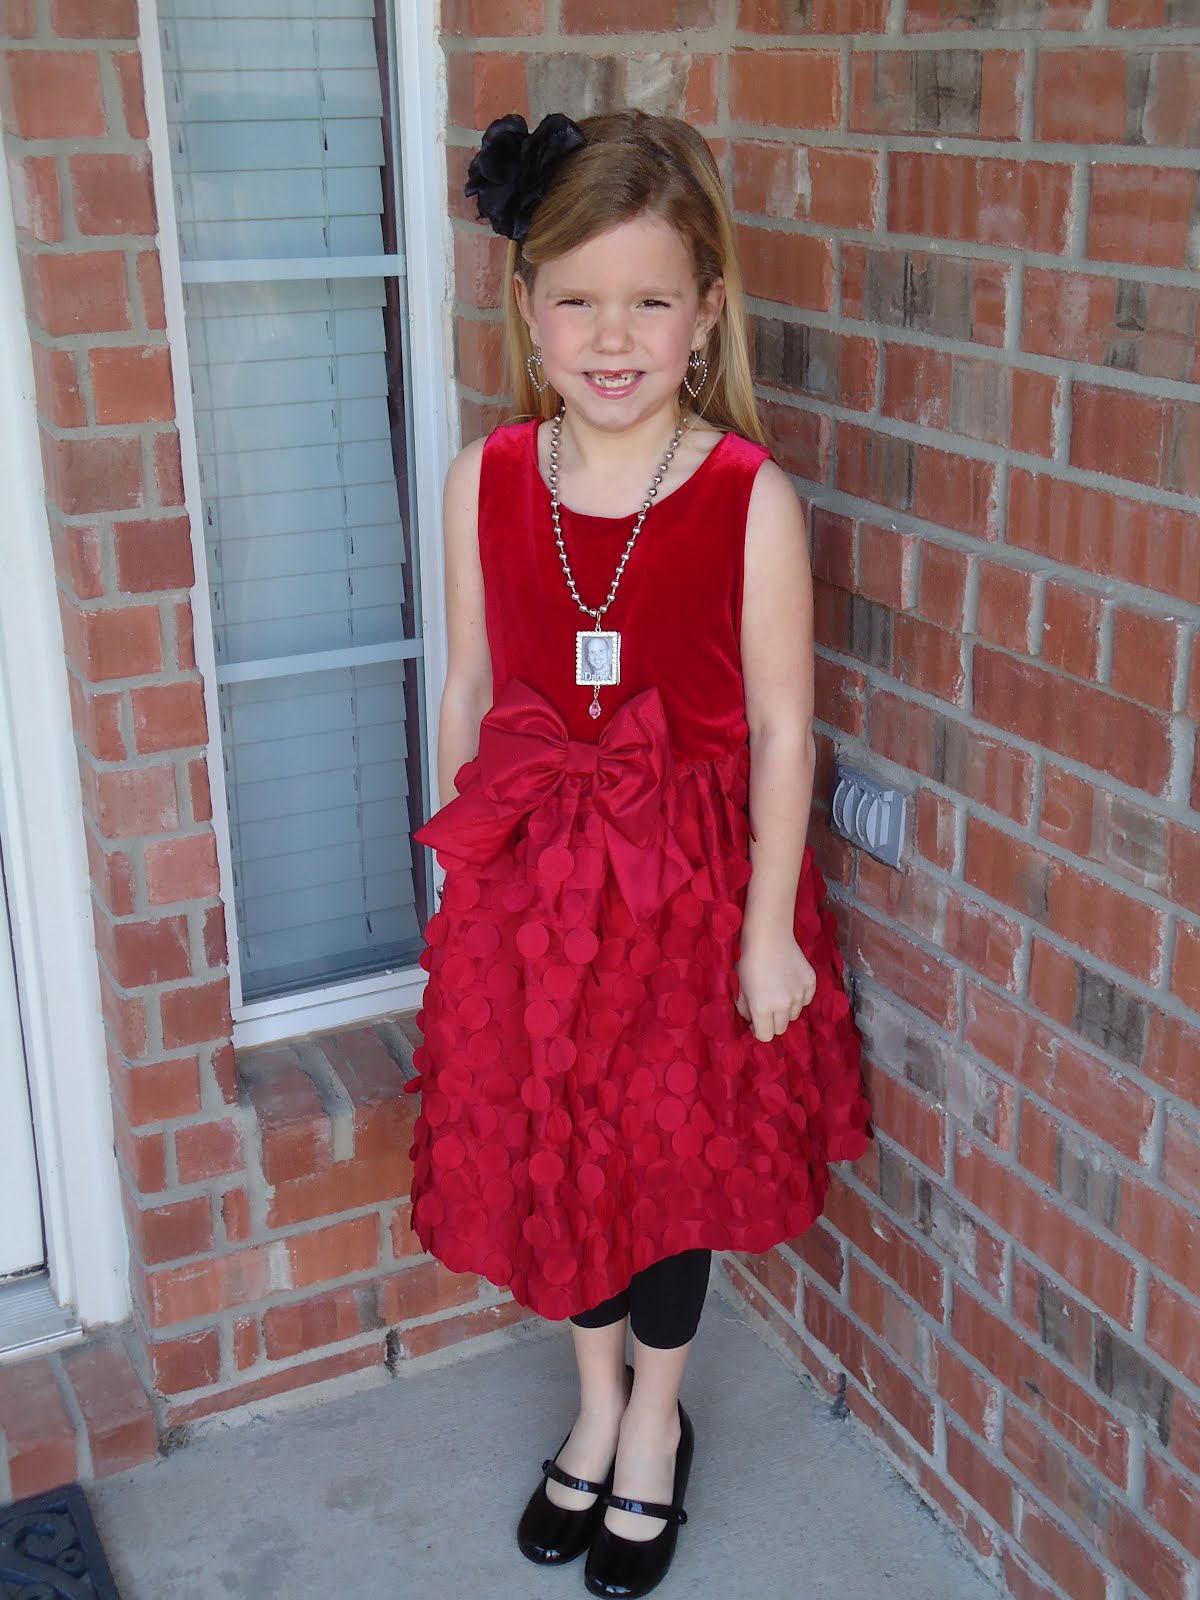 The Buie Blog: Daddy Daughter Dance